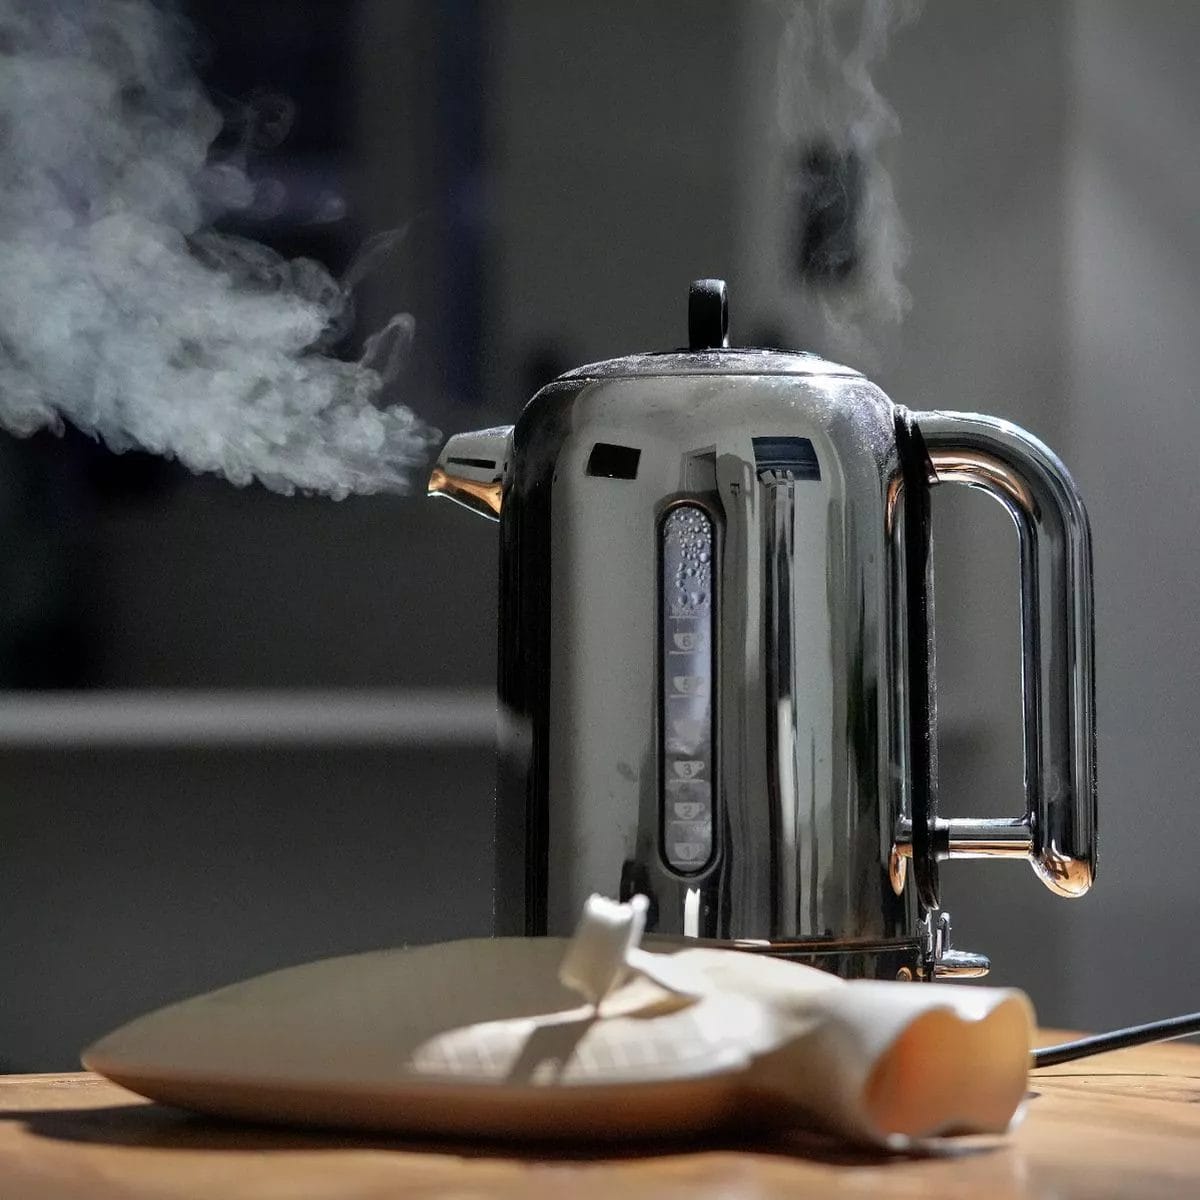 Is it cheaper to boil kettle for washing up?